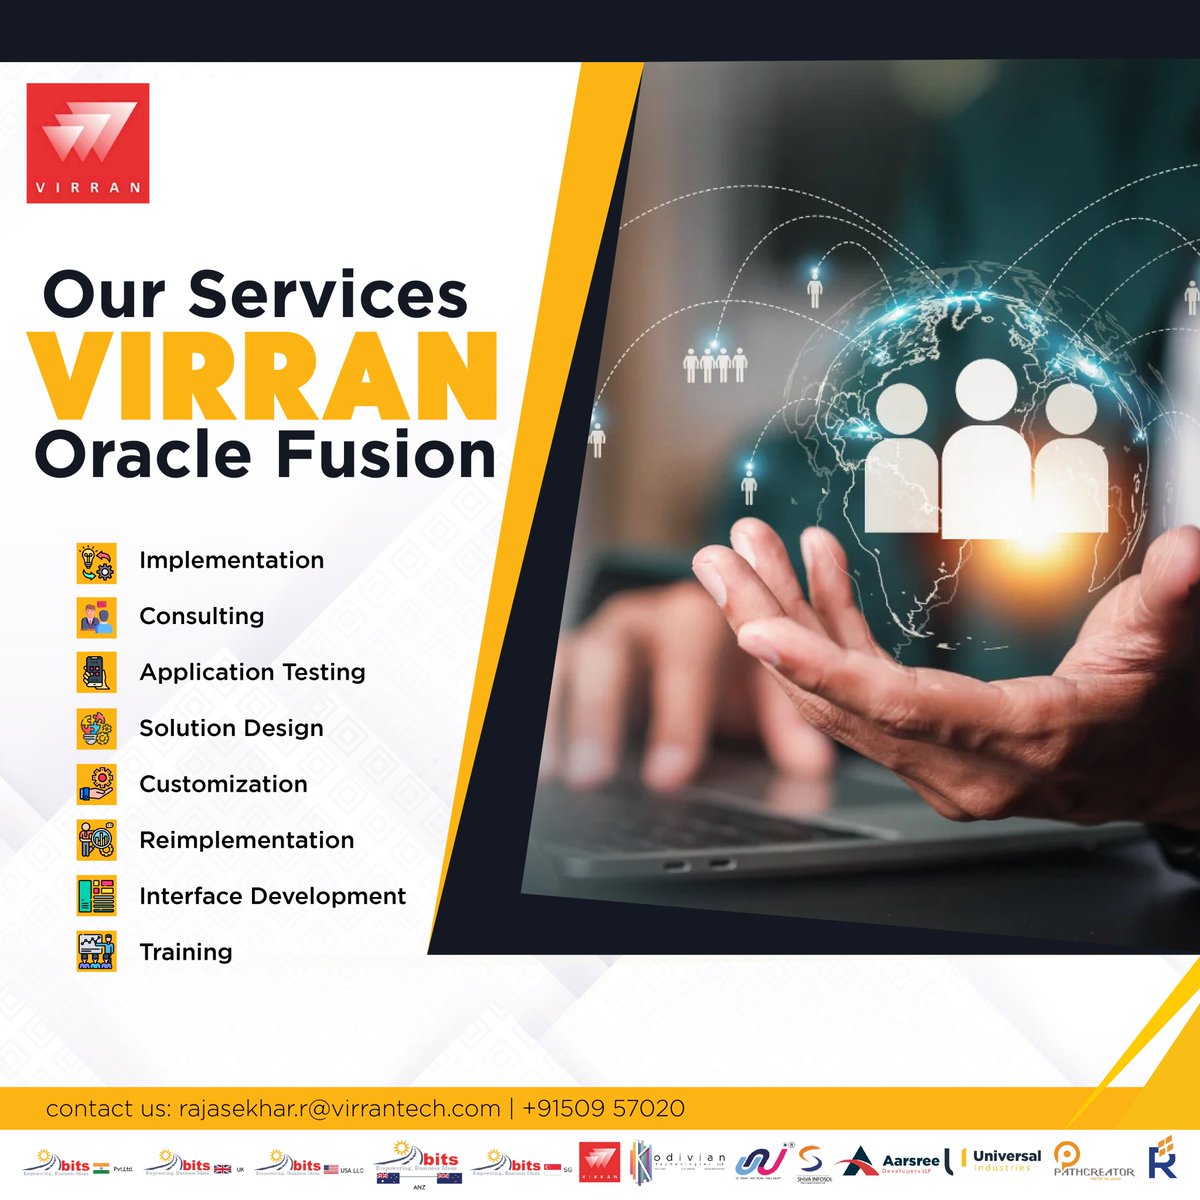 Our Oracle Fusion Services... #virran #ssgroup #ssgroupofcompanies #oracle #oraclefusion #oraclecloud #oracledeveloper #oraclefusioncloud #implementation #applicationtesting #customization #interface #development #consulting #consultingservices #solutiondesign #reimplementation